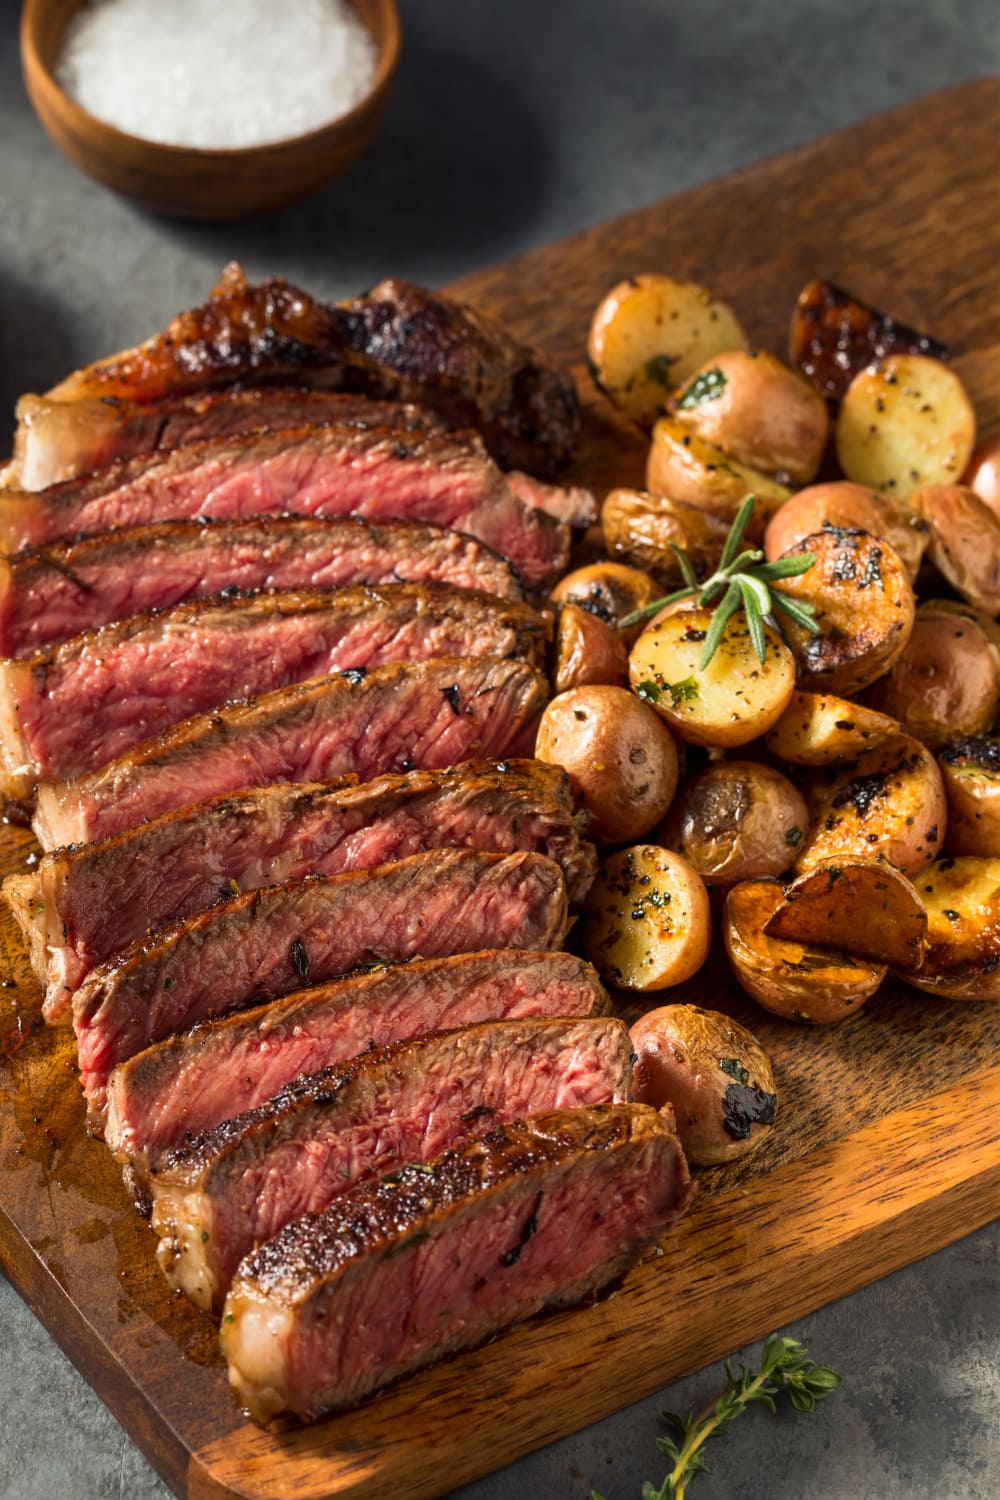 Sliced Steak With Roasted Baby Potatoes on Sides